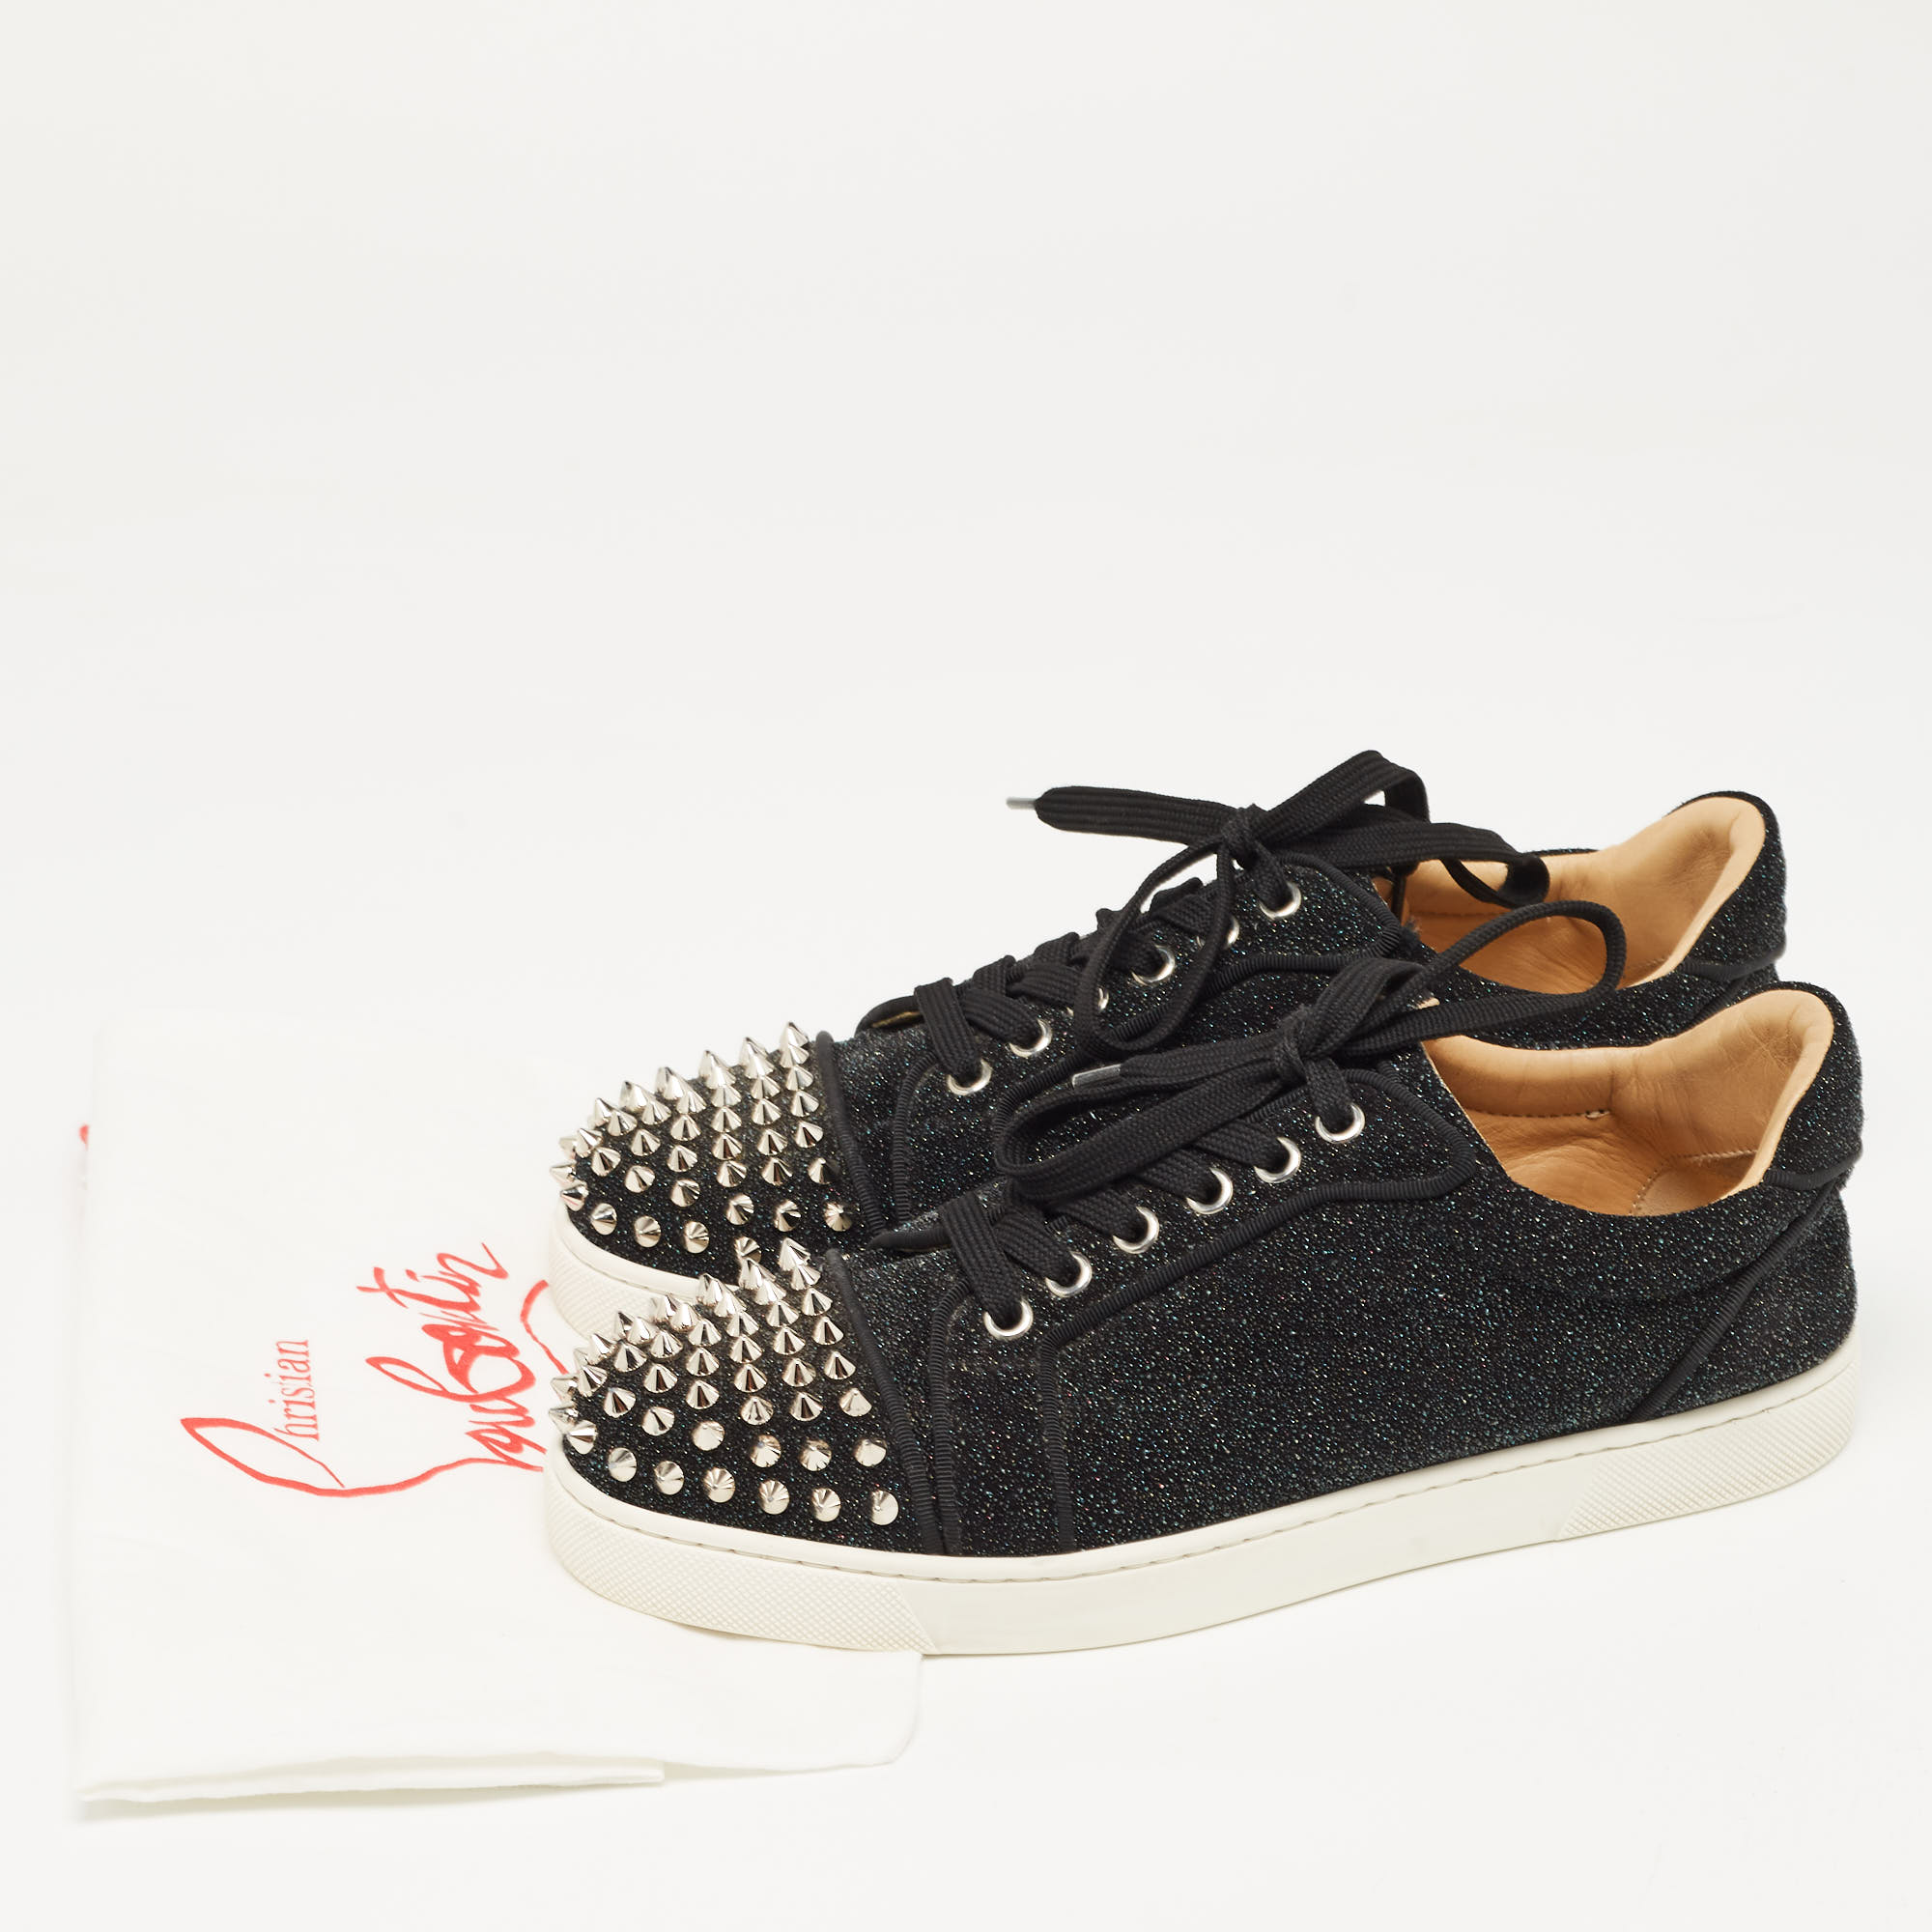 Christian Louboutin Black Textured Suede Louis Junior Spike Sneakers Size 38.5